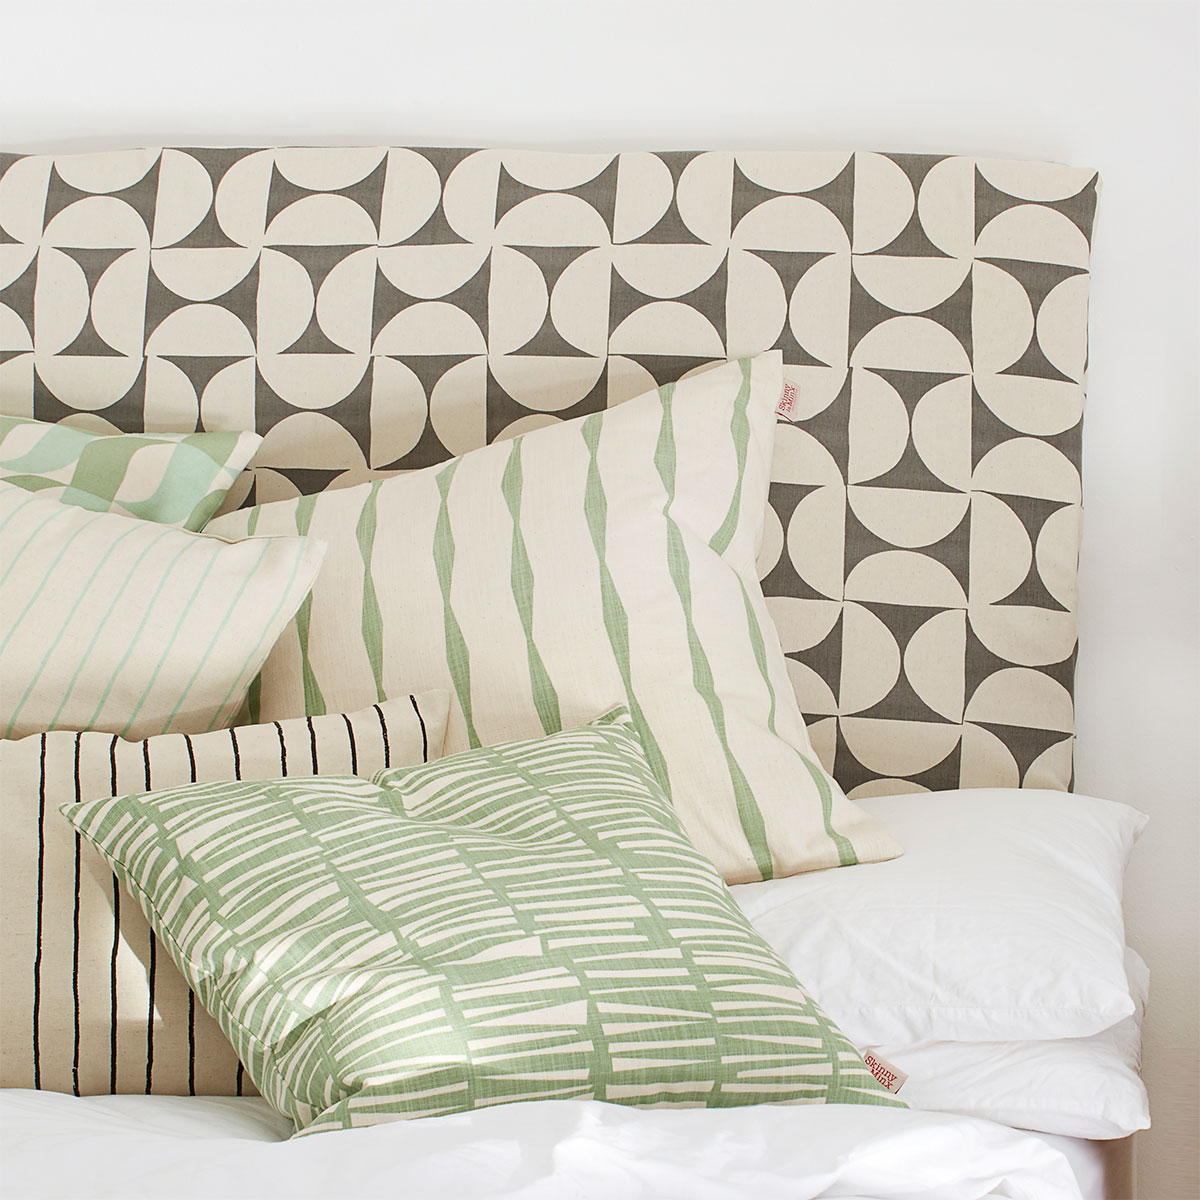 Skinny laMinx Headboard showing pillows and cushions on a bed